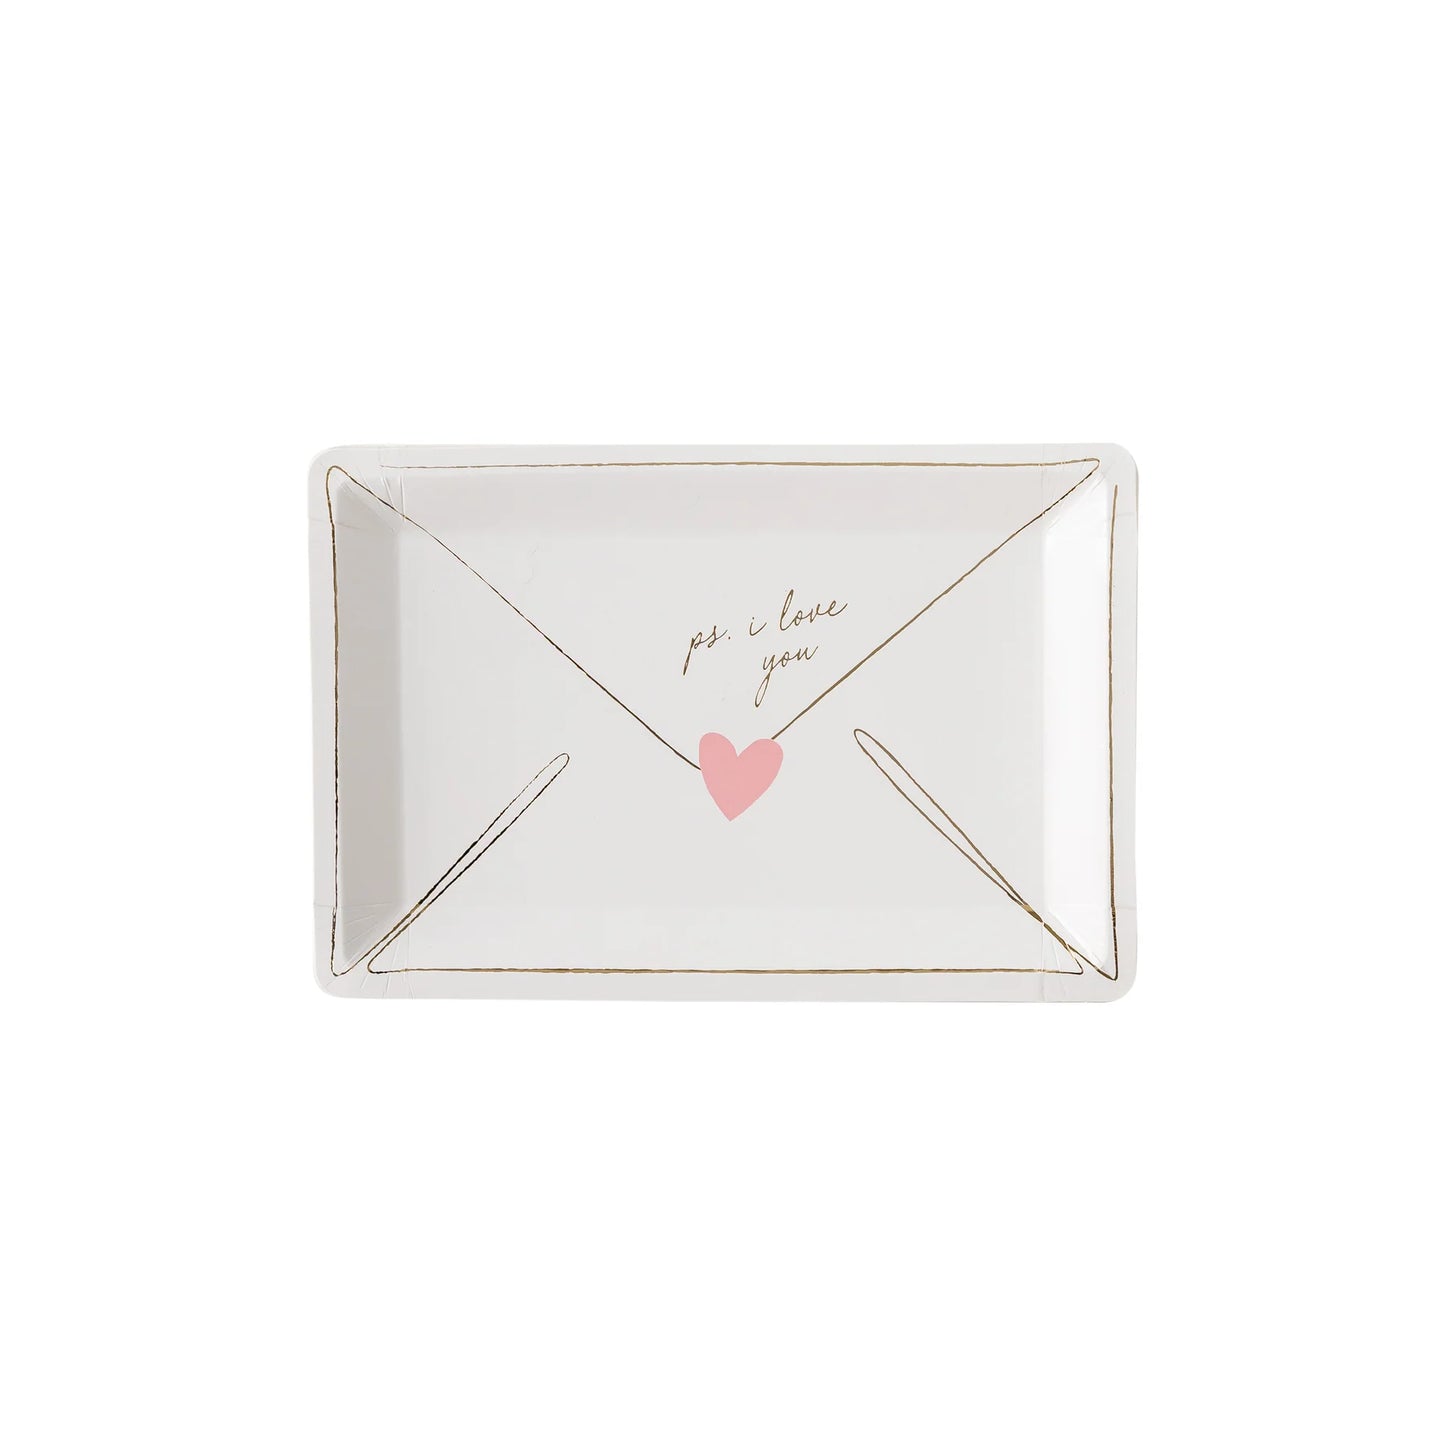 OCCASIONS BY SHAKIRA - VALENTINE LOVE NOTES PLATE